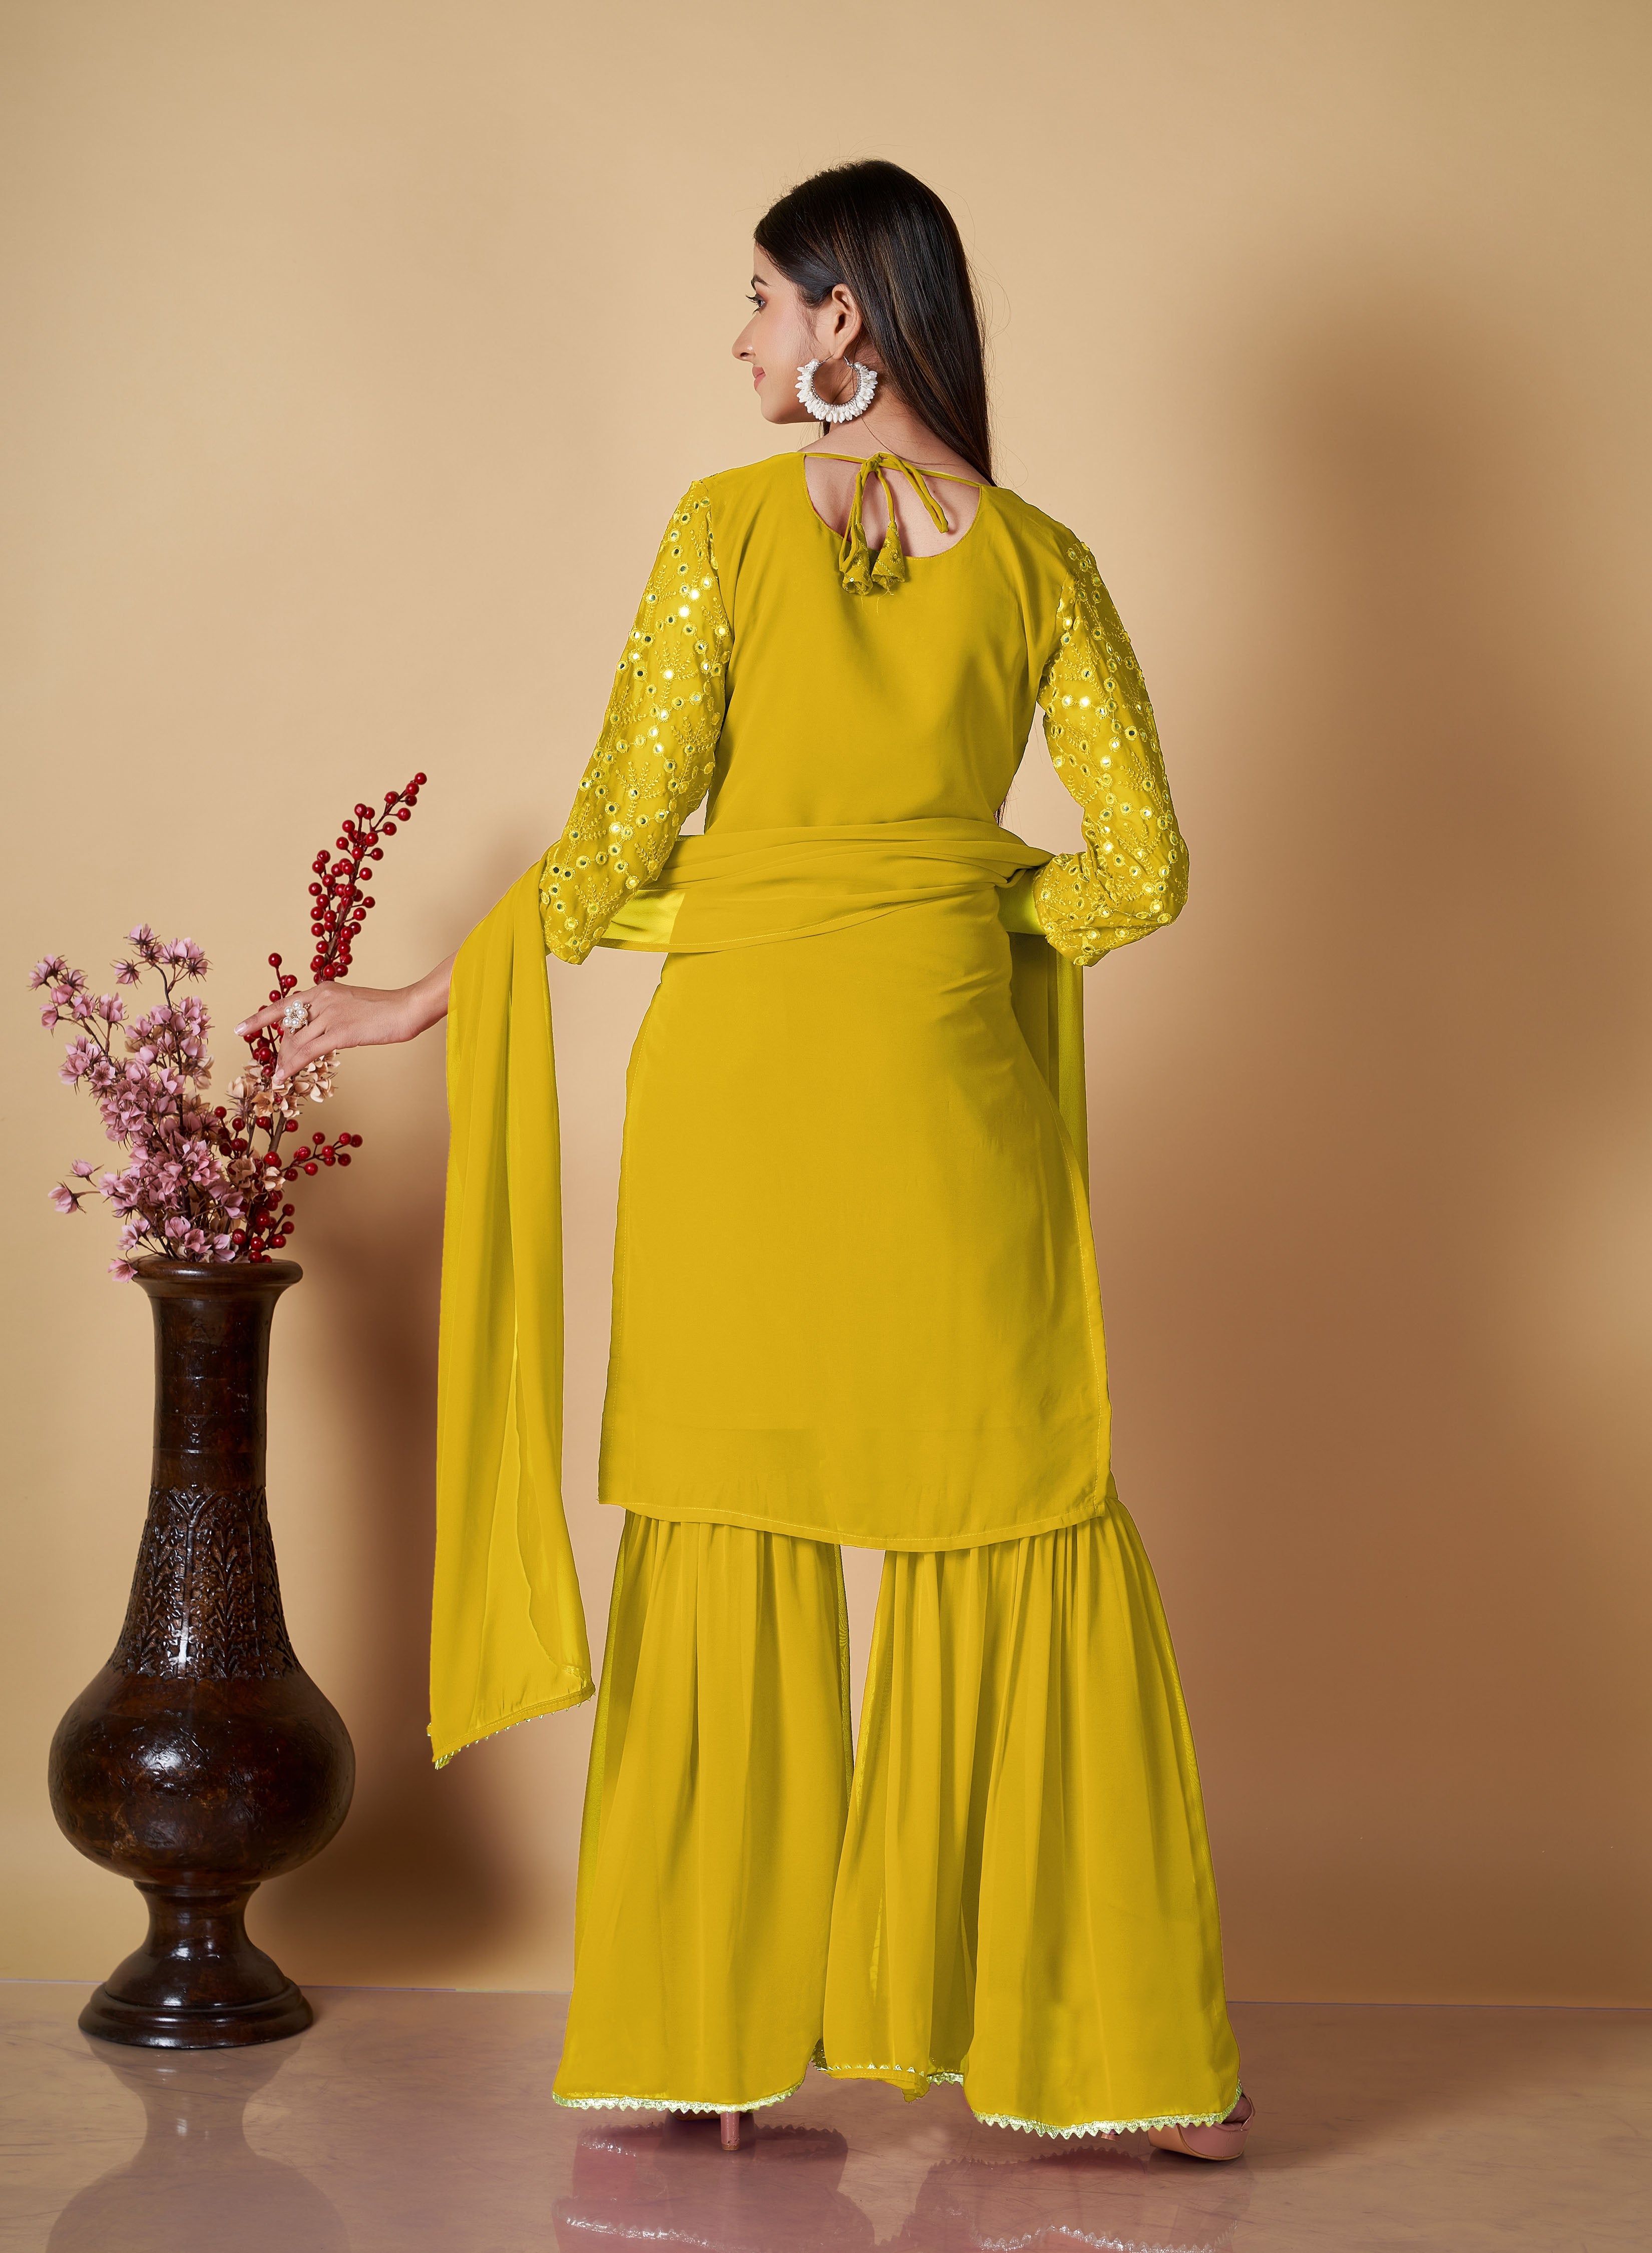 Women's Party Wear Embroidery Kurti Sharara Collection - Final Clearance Sale